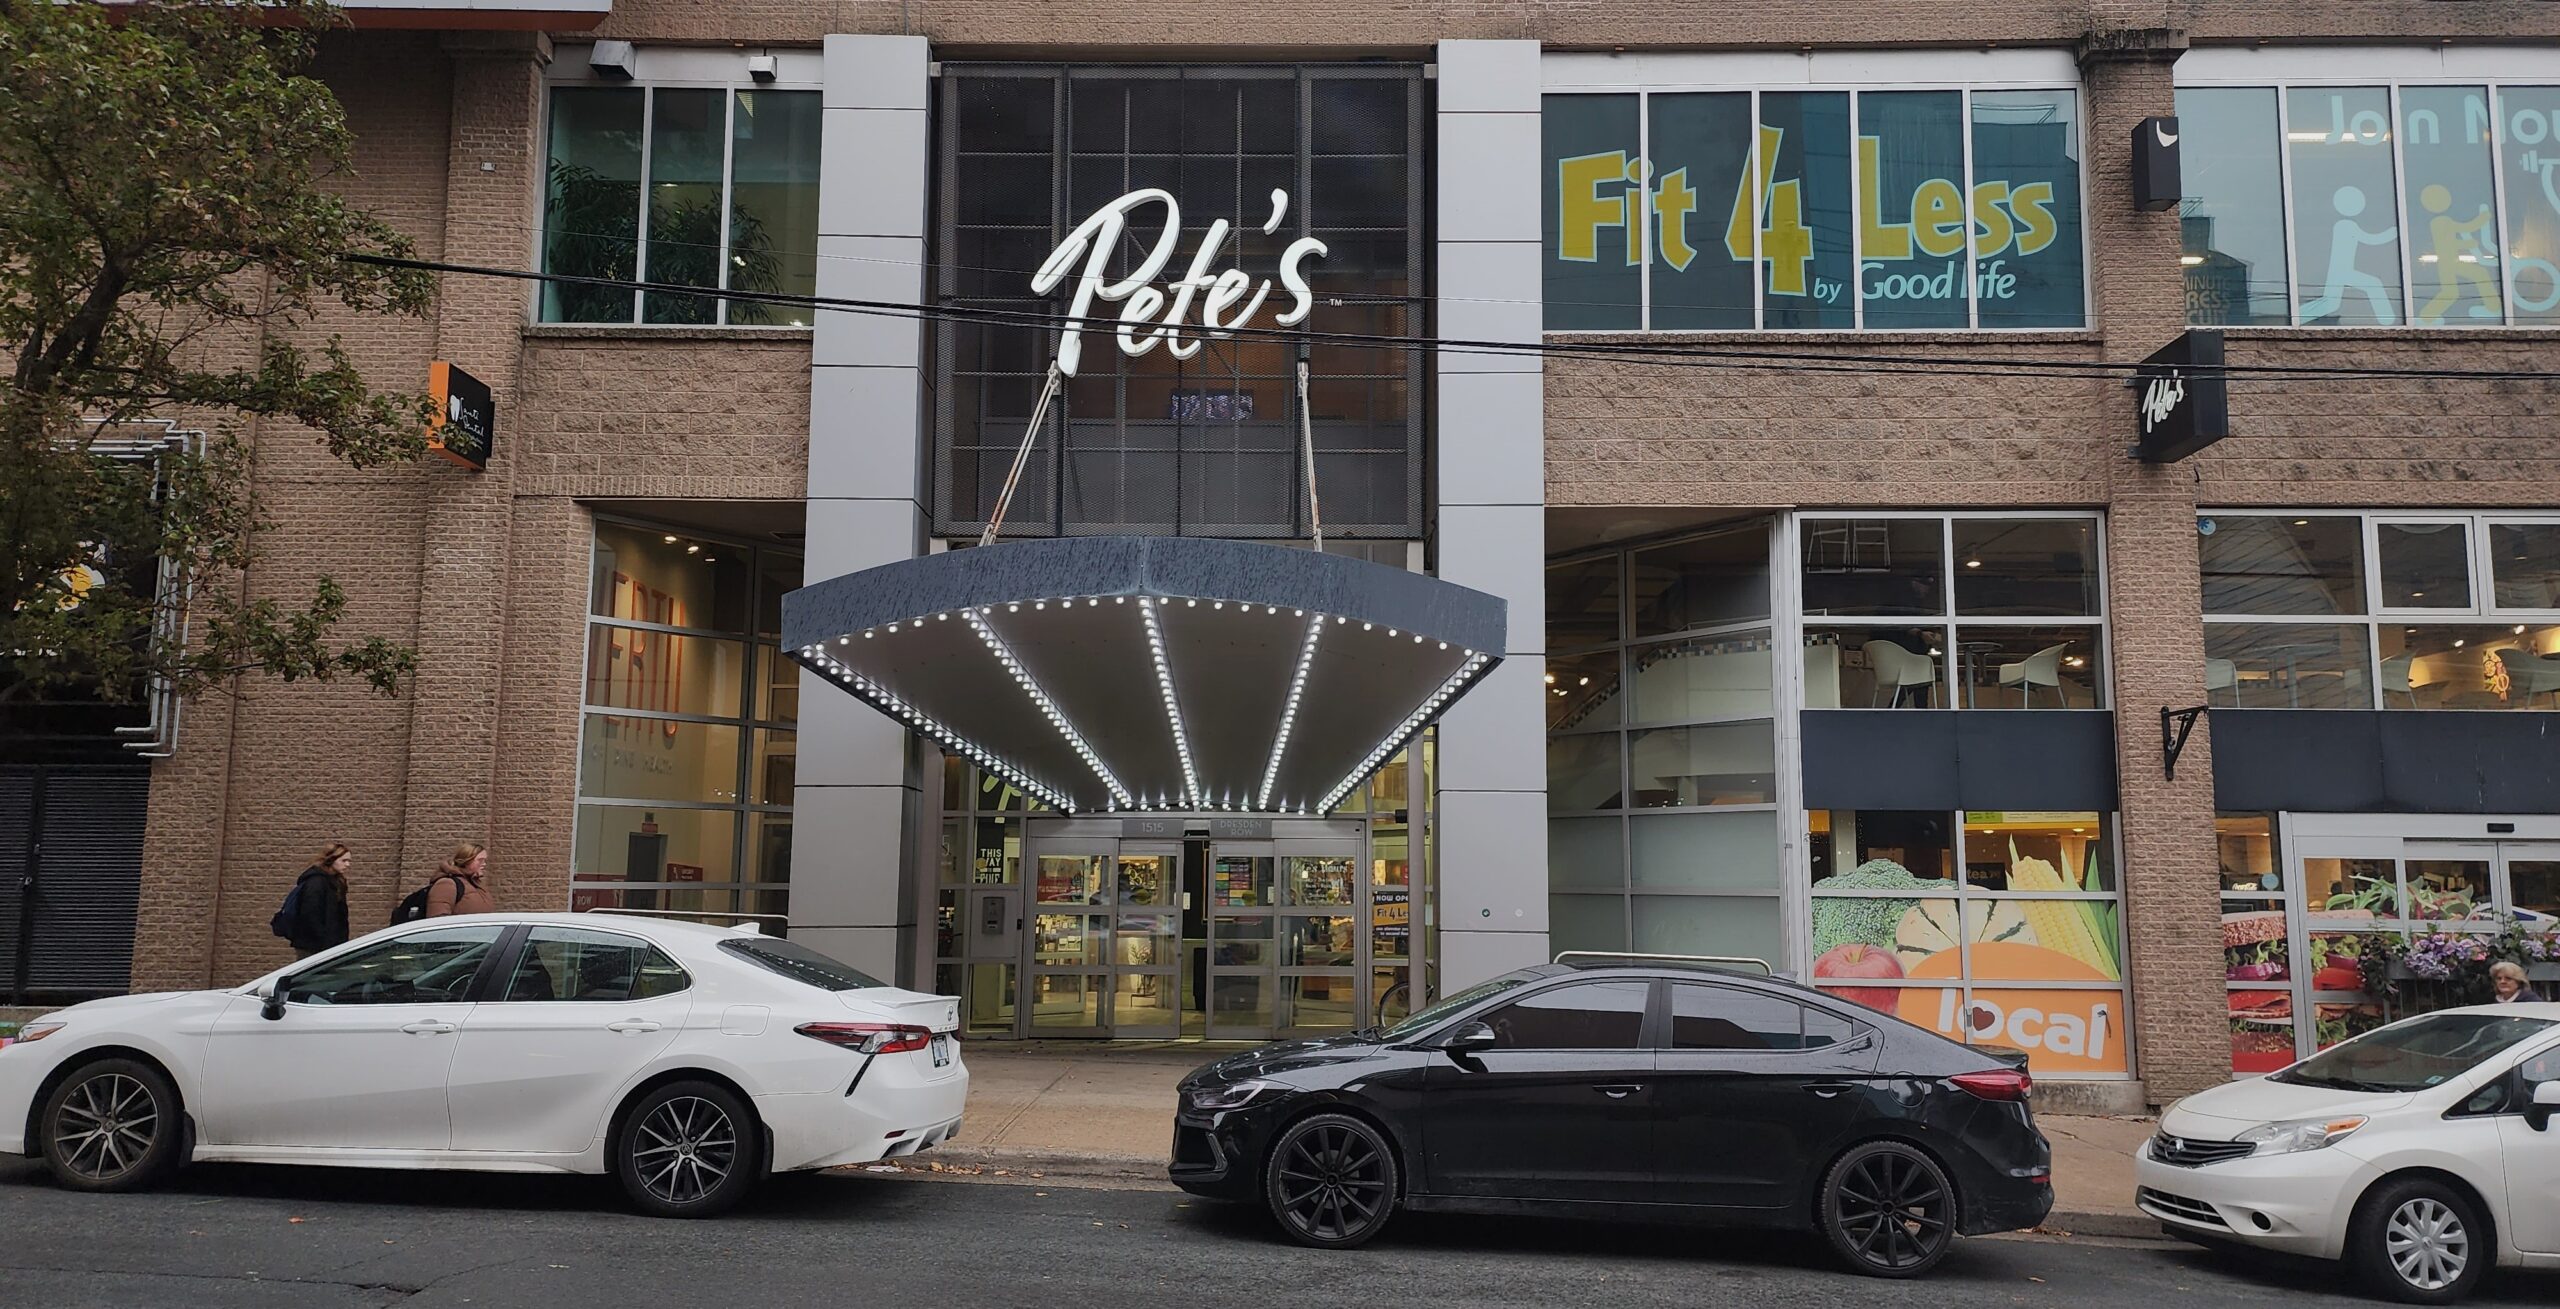 Pete's sign on storefront with cars in foreground